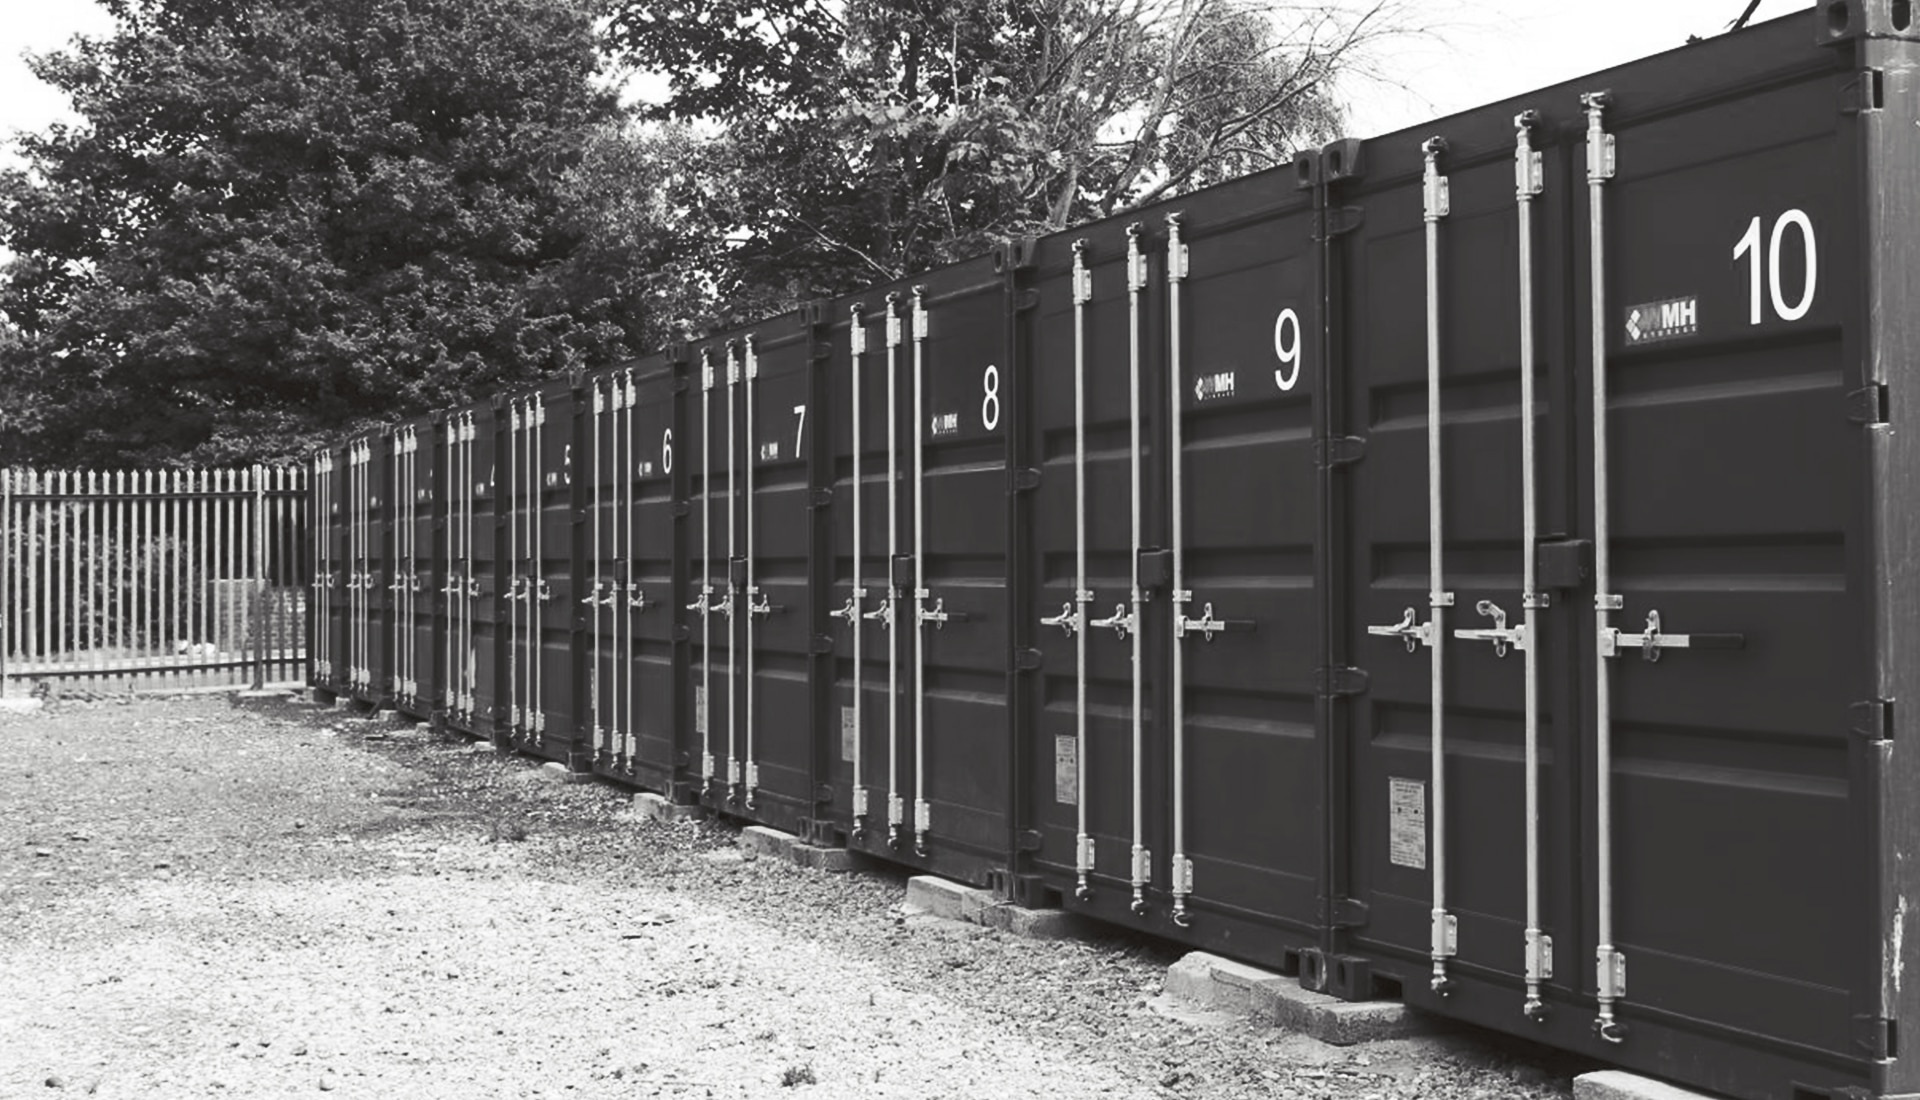 Storage Containers at WMH